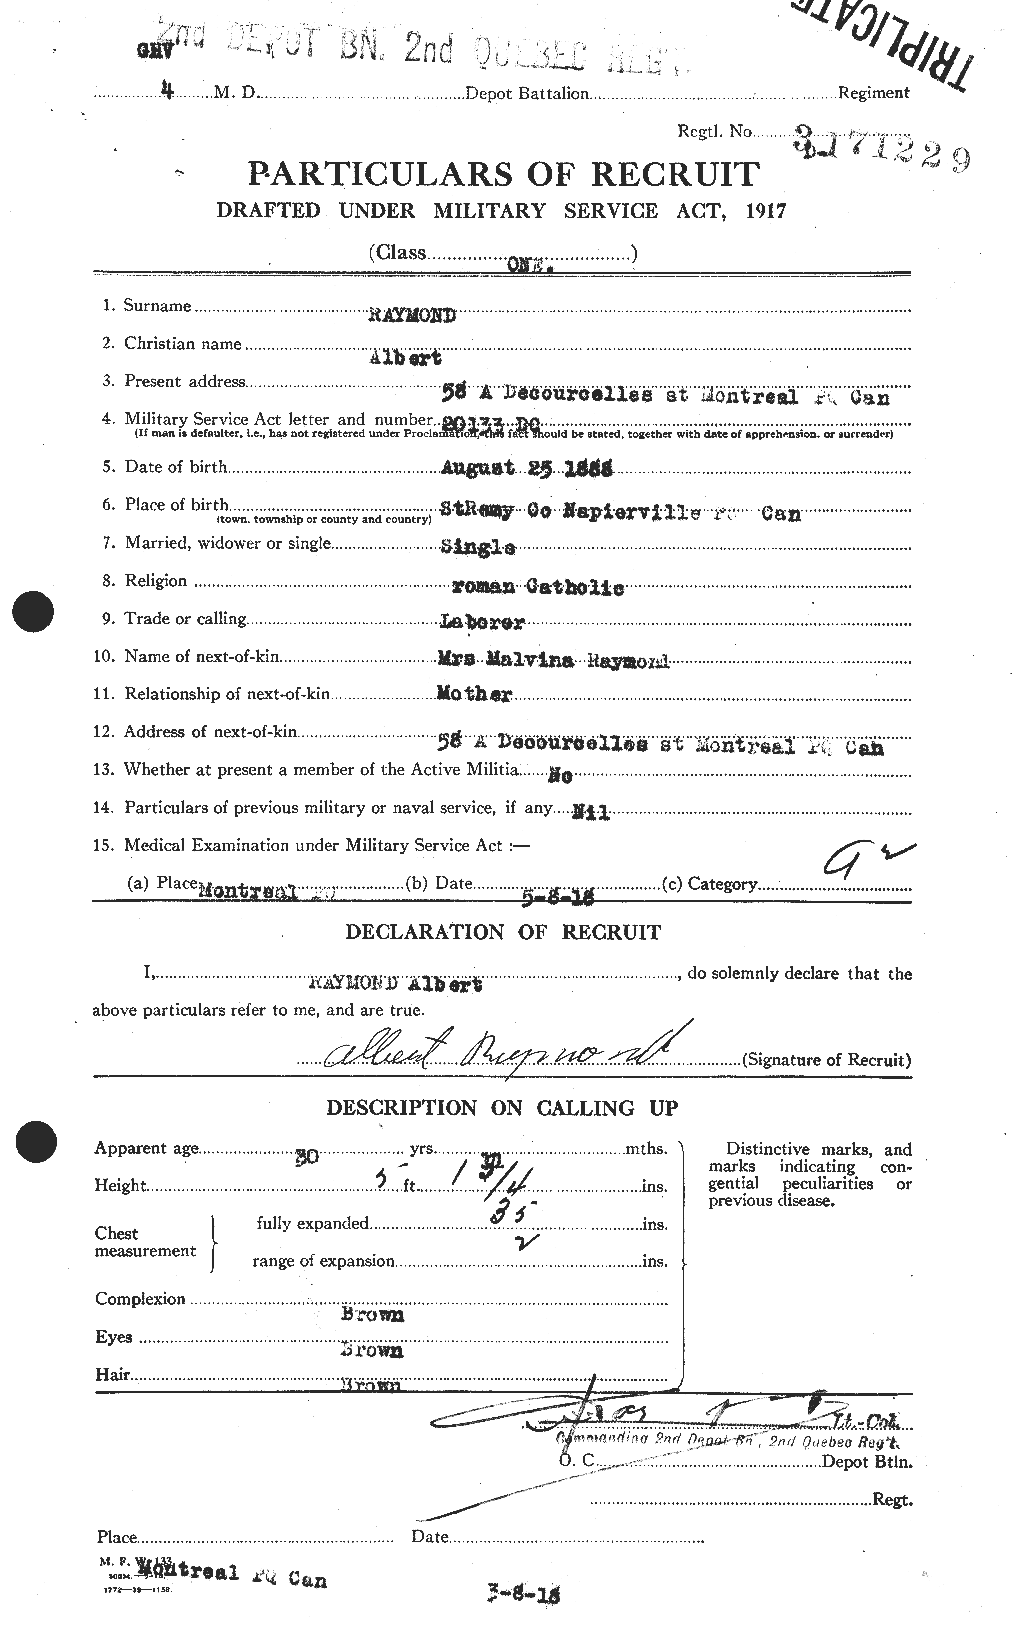 Personnel Records of the First World War - CEF 595244a